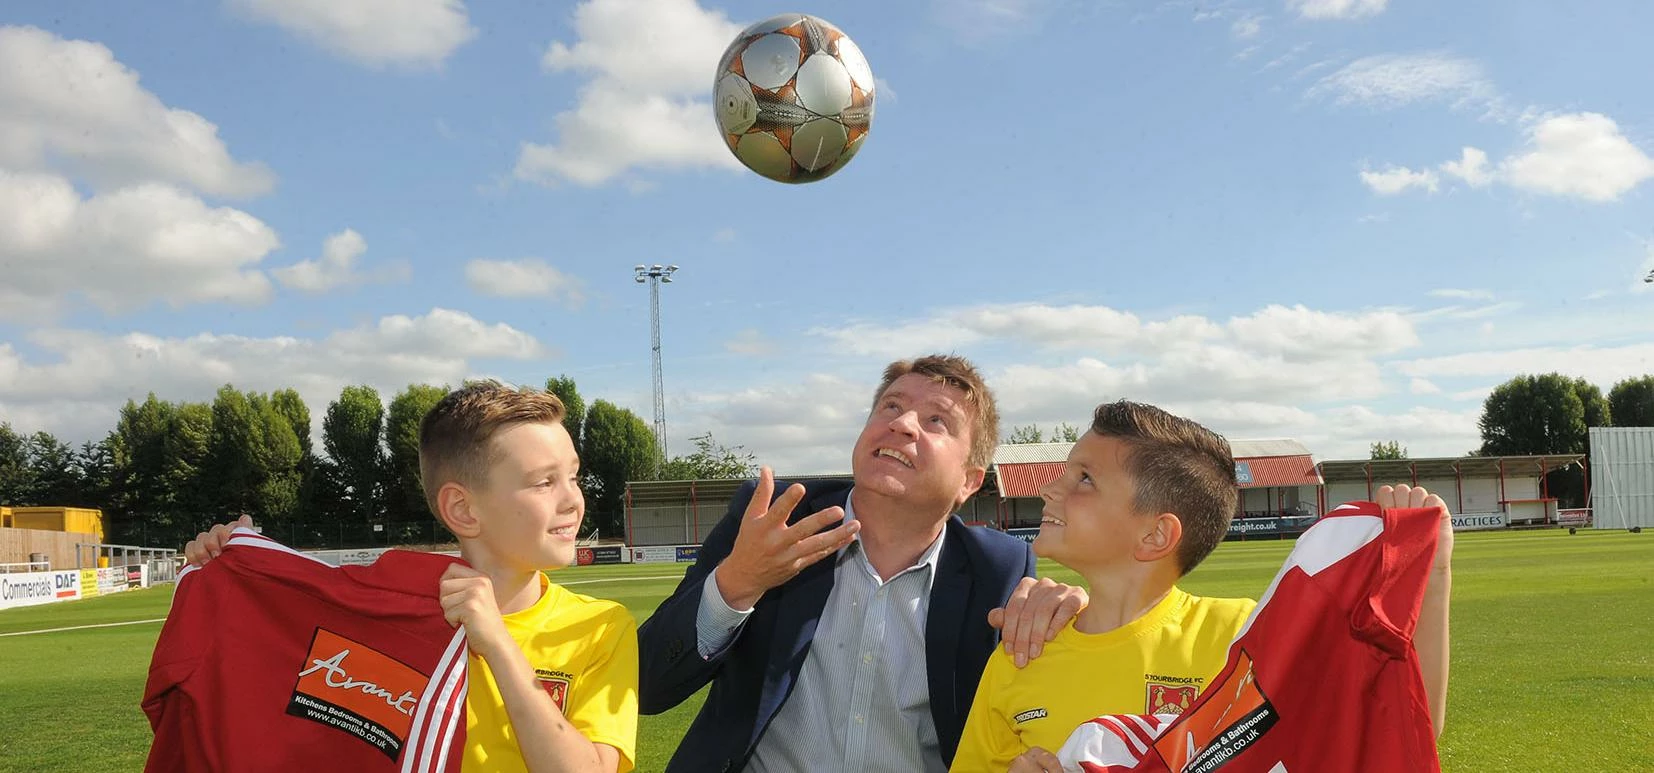 Lee Capewell (MD of Avanti) celebrates new sponsorship deal with Stourbridge Youth players Edward So